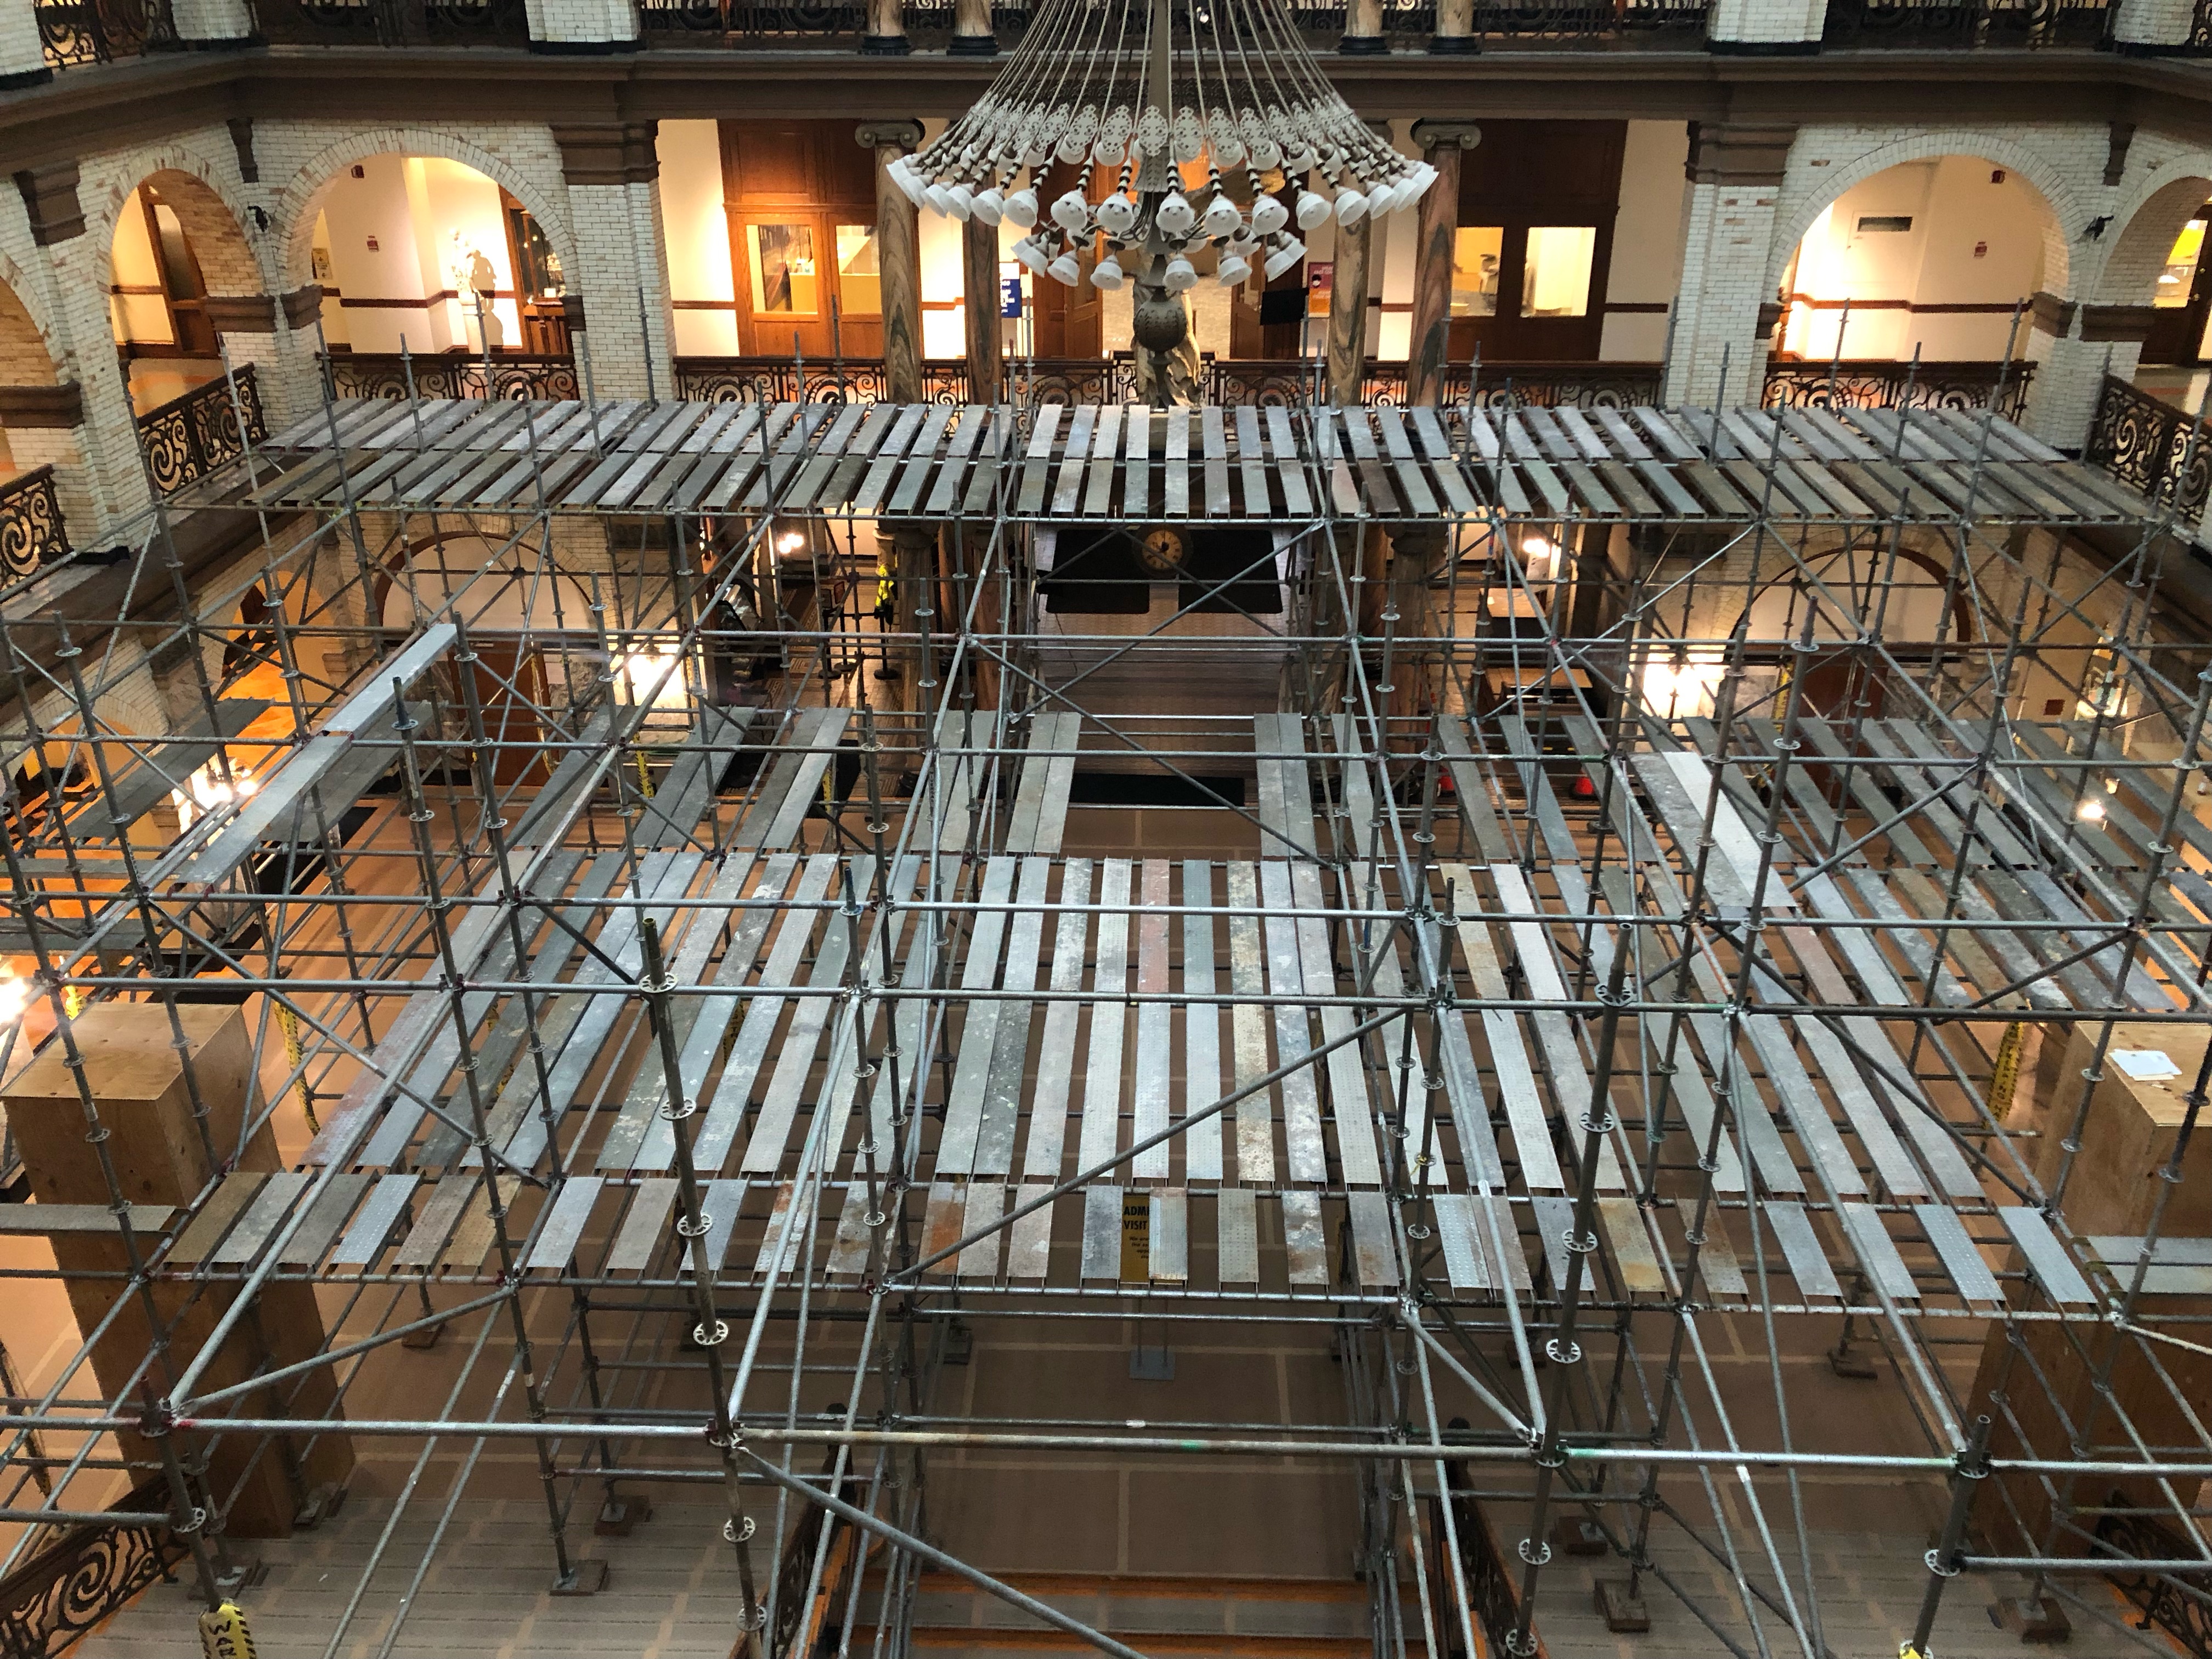 The second floor of scaffolding, as depicted on Nov. 15, 2021. Note the candelabra covered through the tall wooden boxes and the gray floor covering the marble staircase and tiled court.